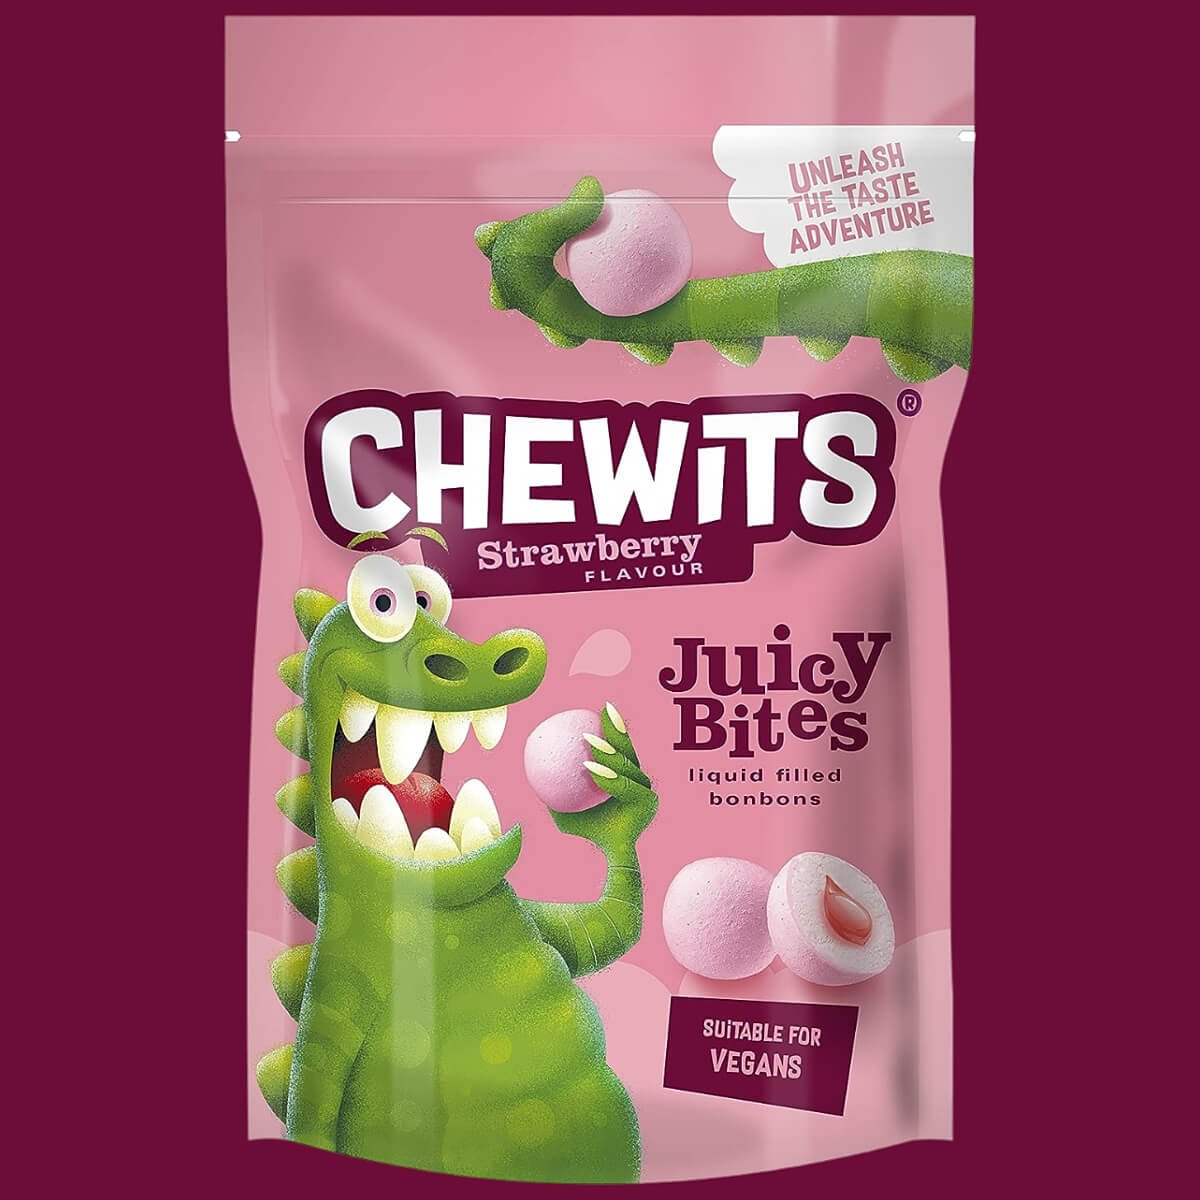 A pouch of Chewits Juicy Bites, Strawberry Flavour. Pink and claret packaging with a green dinosaur and claret red background